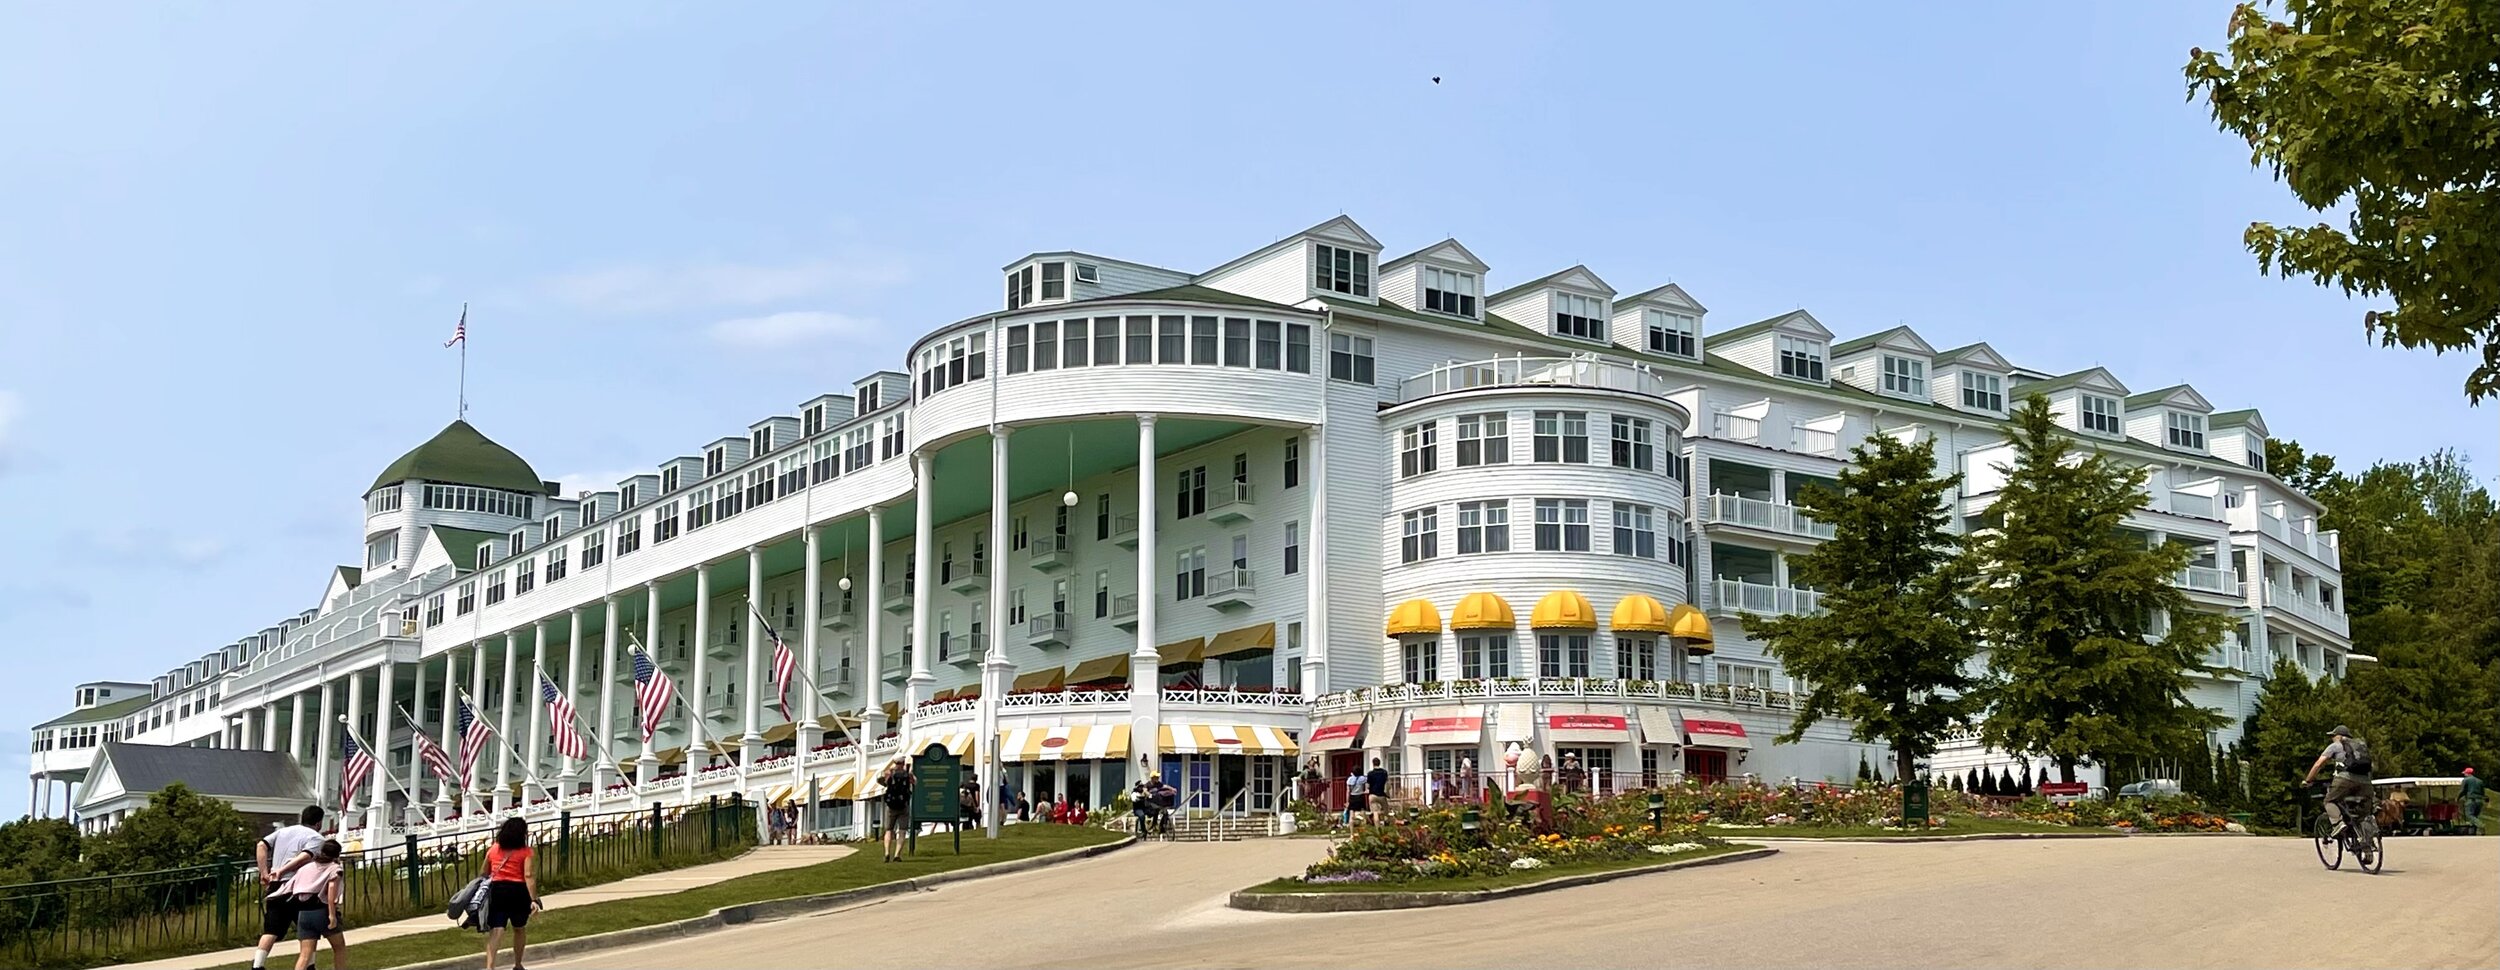  The Grand has 397 guest rooms, each individually and artfully decorated so that no two rooms are alike. The Grand also takes pride in having the longest porch in the world: 660 feet! And in case you didn't notice…that is Craig on his bicycle on the 